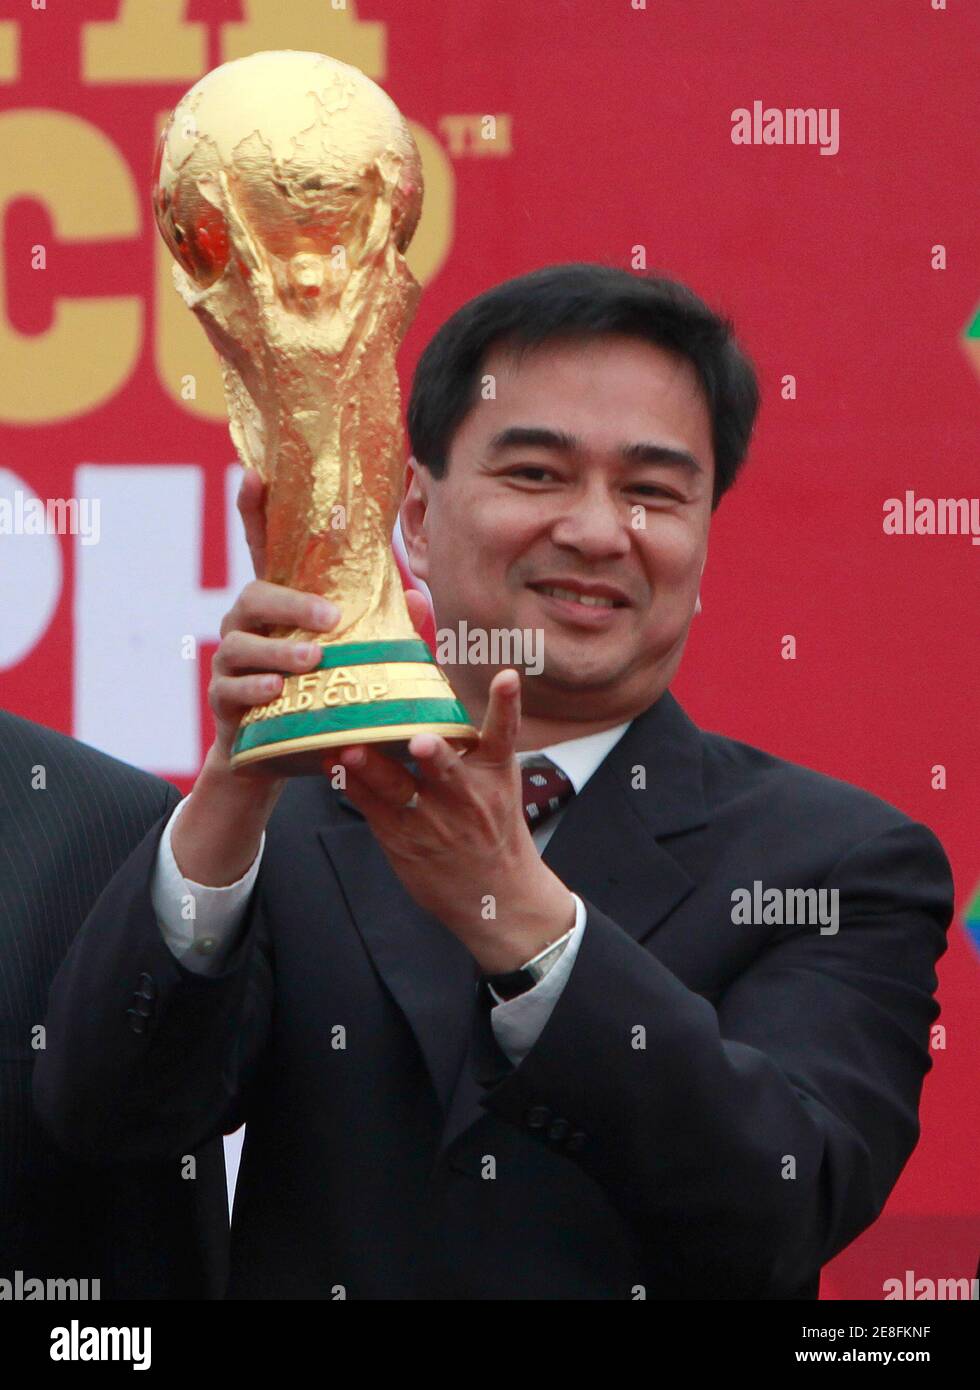 Thailand's Prime Minister Abhisit Vejjajiva holds up The FIFA World Cup trophy after it arrived at Don Muang airport in Bangkok January 21, 2010. The trophy will be in Bangkok for three days as part of its tour around the world for soccer fans. REUTERS/Chaiwat Subprasom  (THAILAND - Tags: SPORT SOCCER) Stock Photo